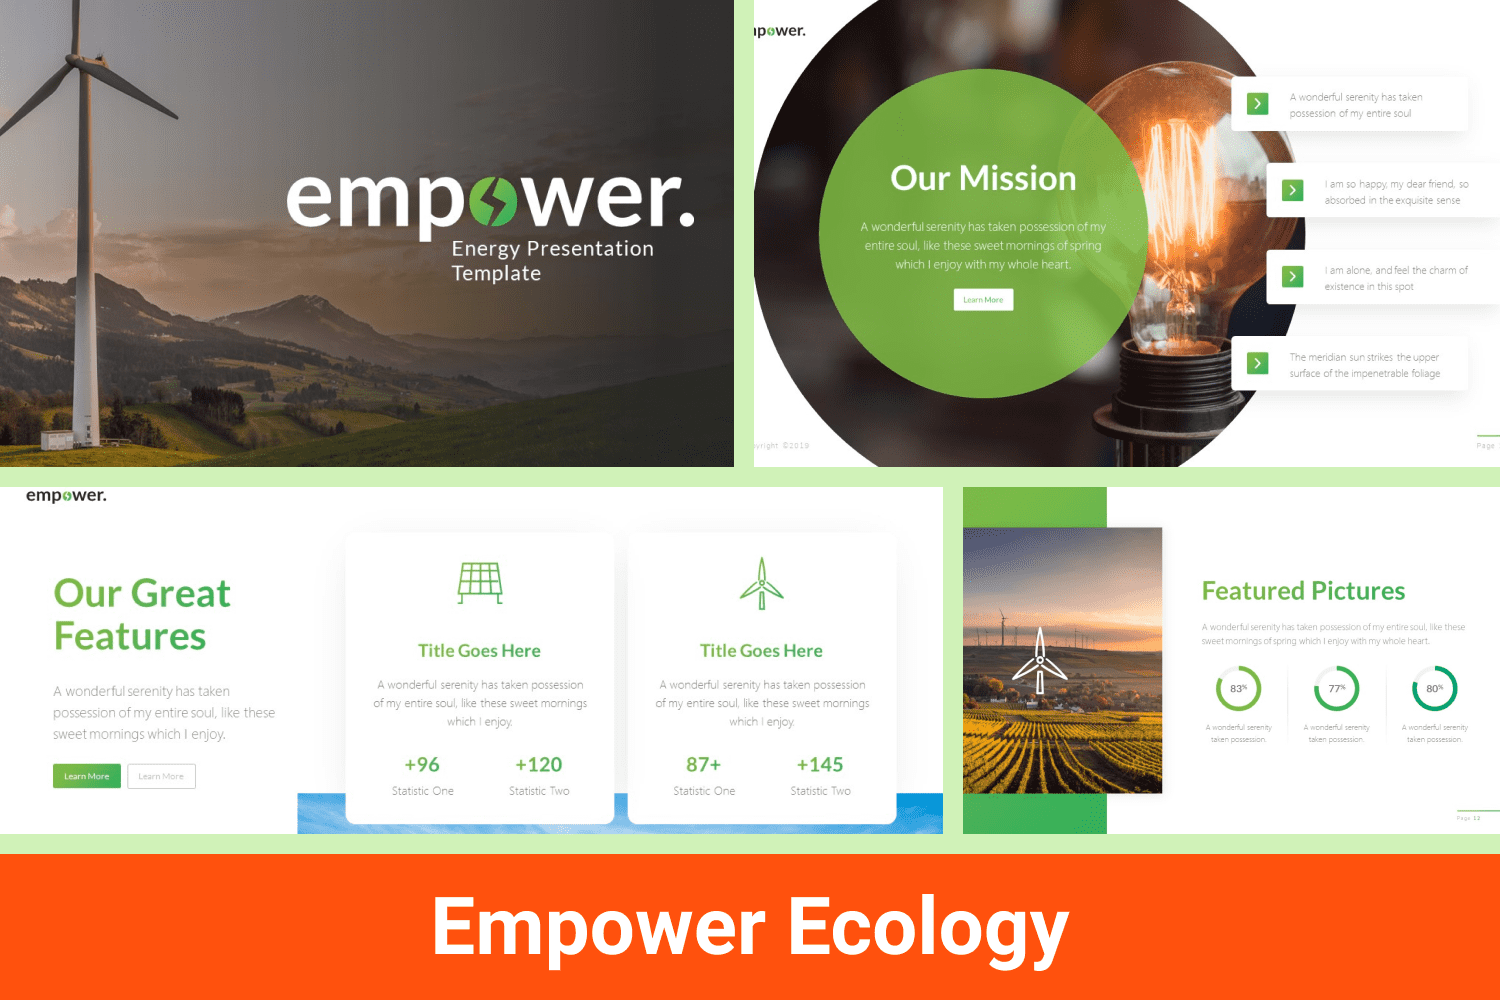 This template is undoubtedly trending as it promotes the idea of ​​eco-life.